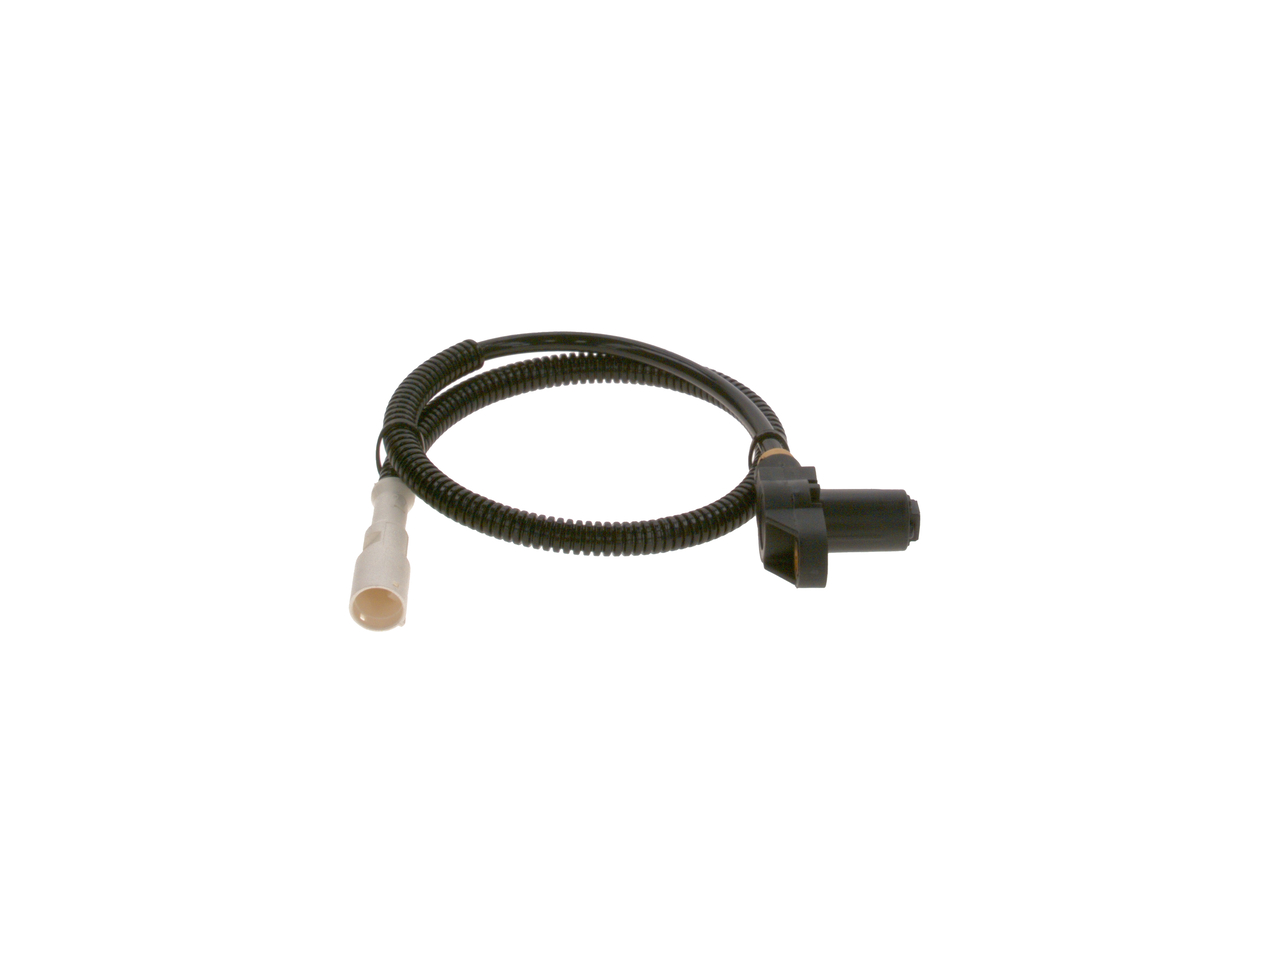 BOSCH 0 986 594 026 ABS sensor with cable, Passive sensor, 625mm